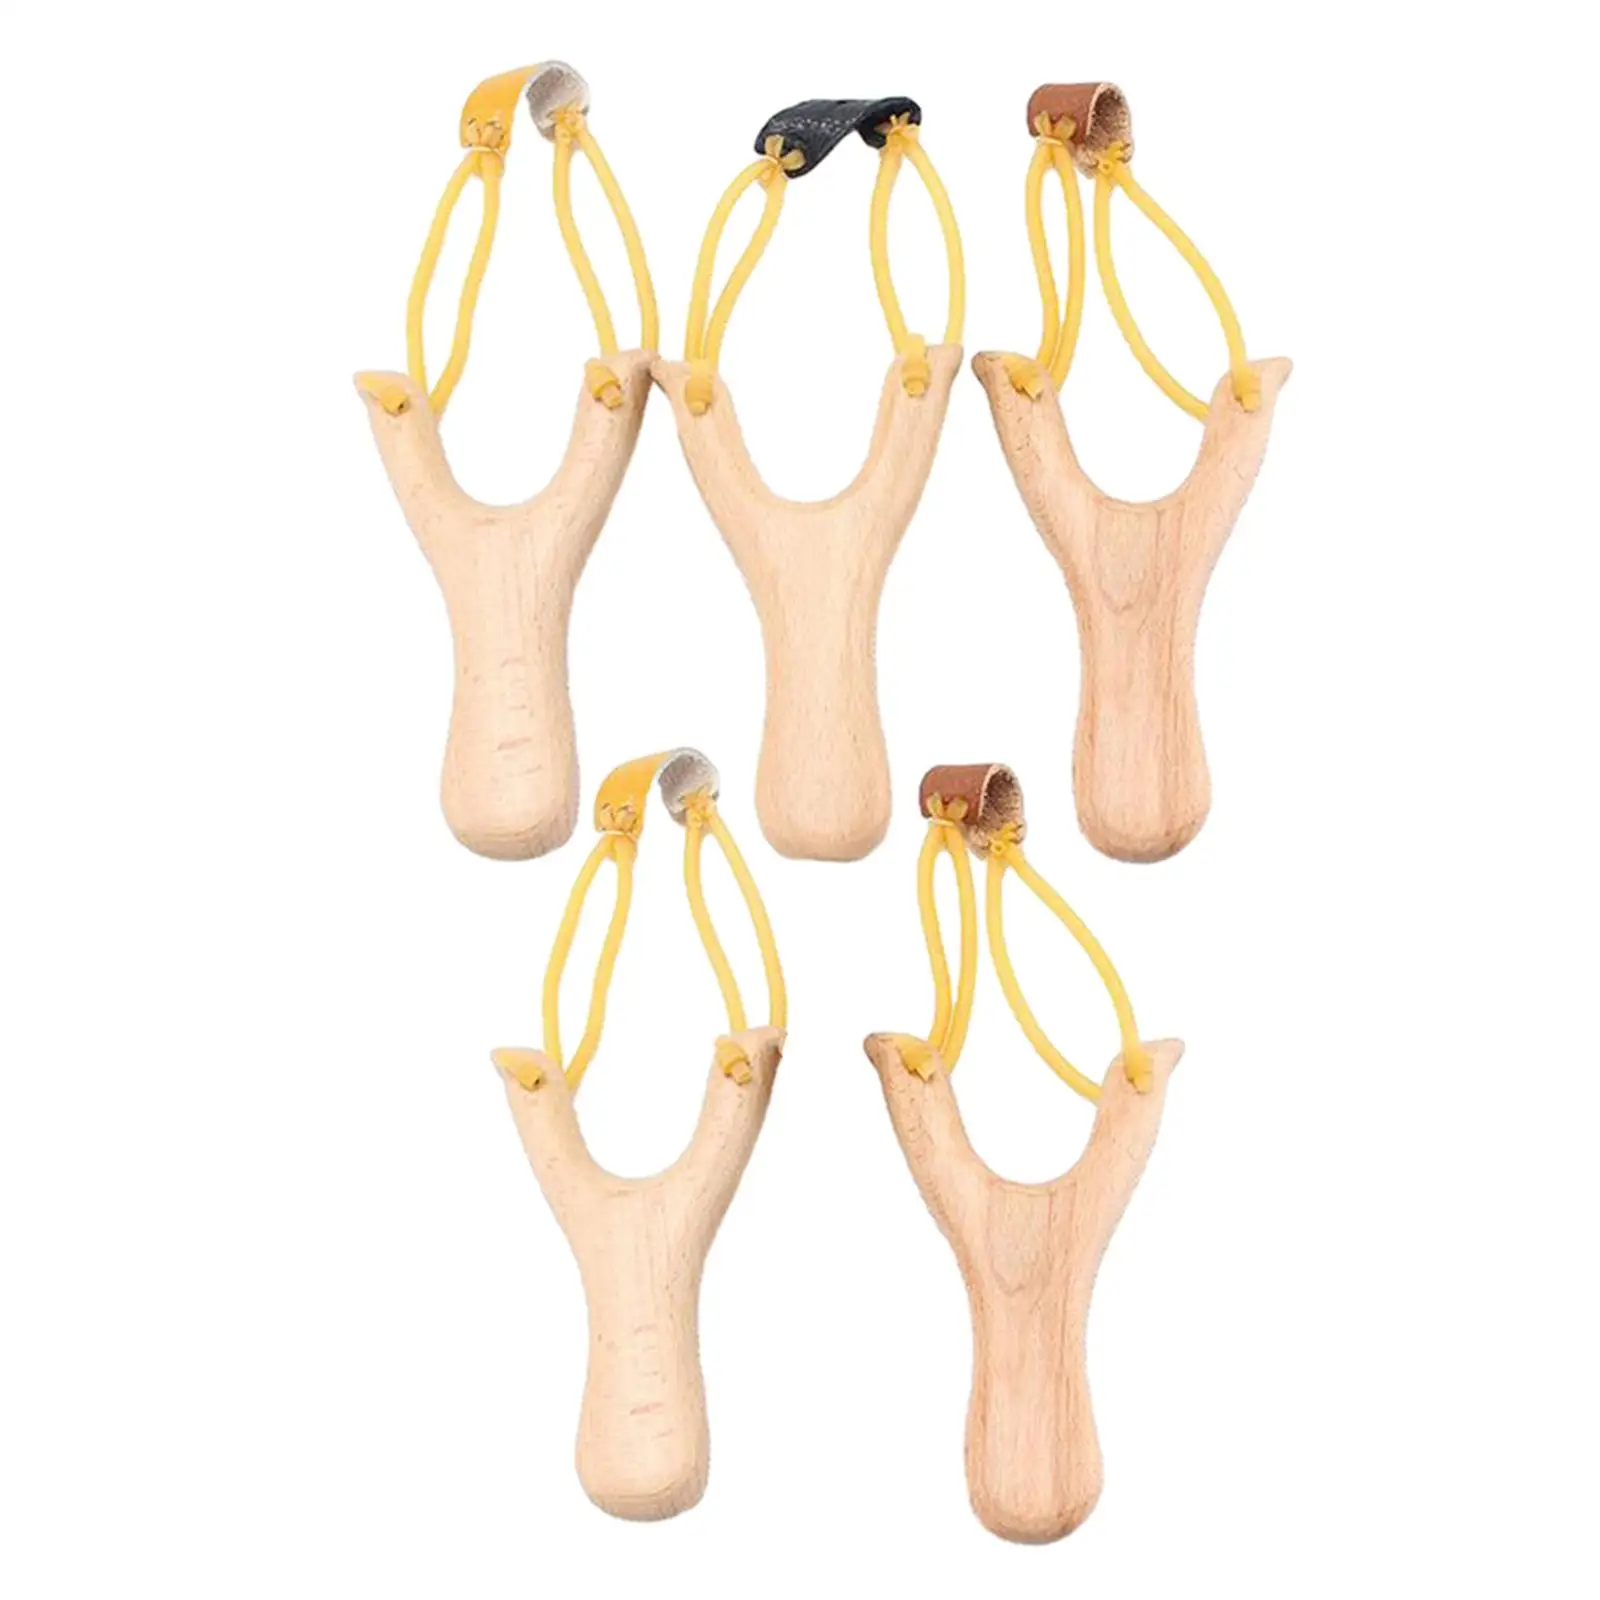 

5 Pieces Wooden Slingshots Toys Kids Hunting Slingshots Kids Adults Toy for Backpacking Competition Fishing Outdoor Game